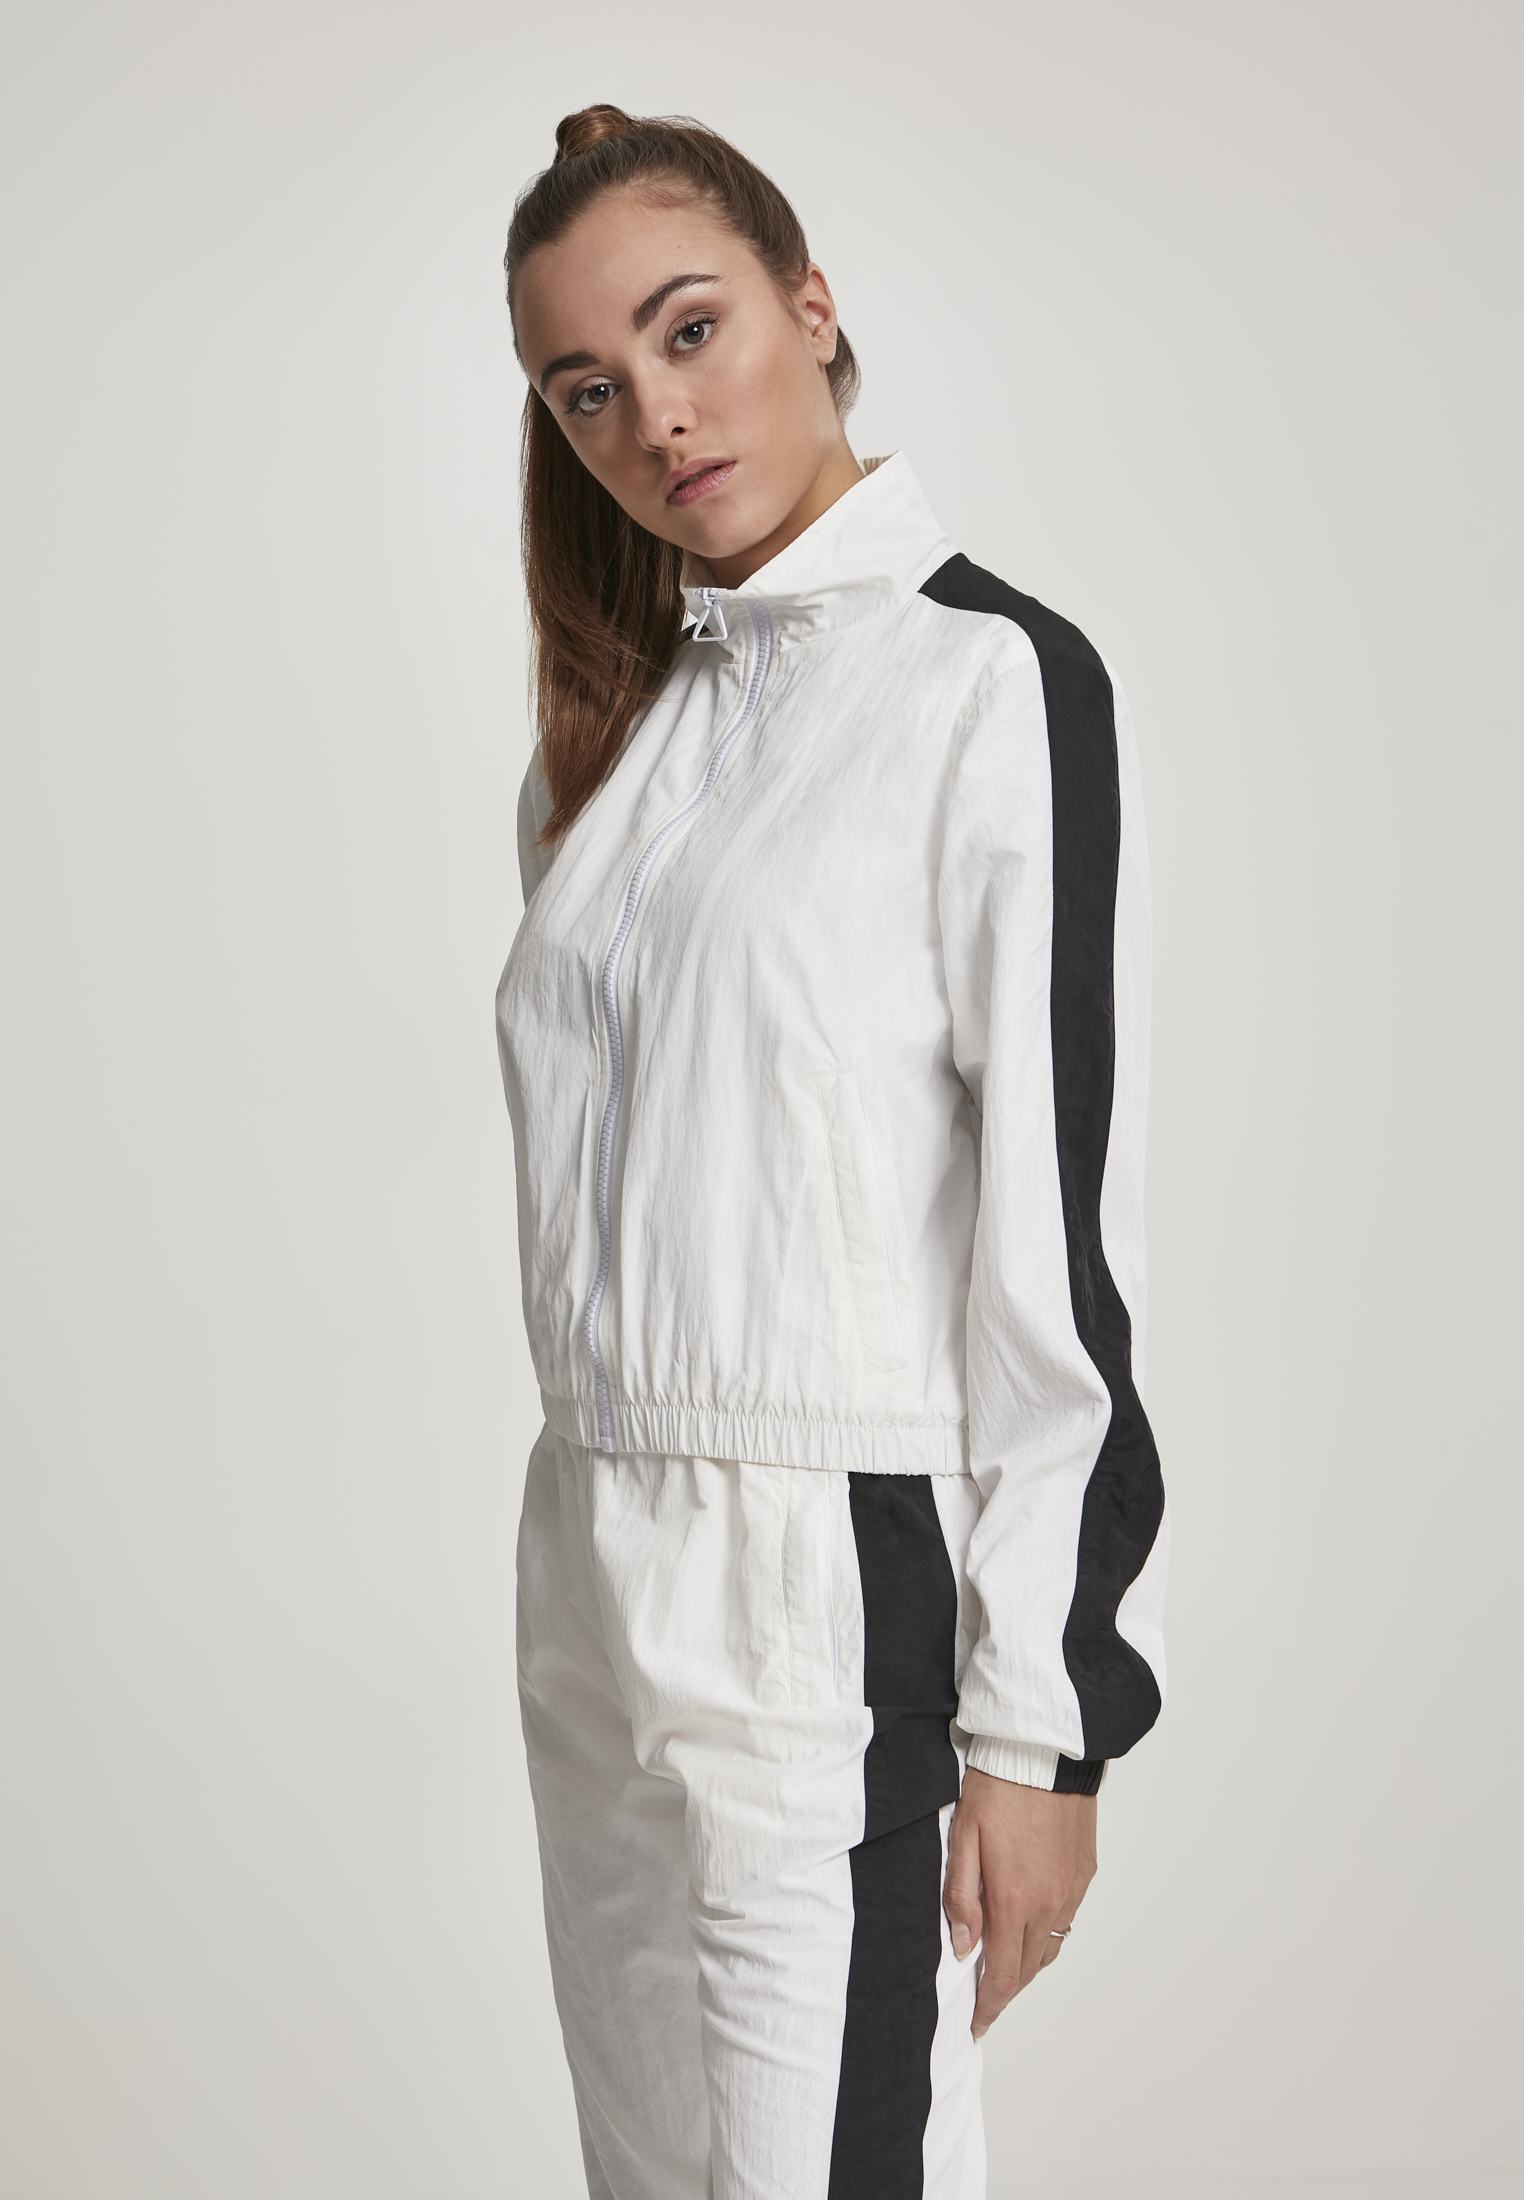 Light Jackets Ladies Short Striped Crinkle Track Jacket in Farbe wht/blk